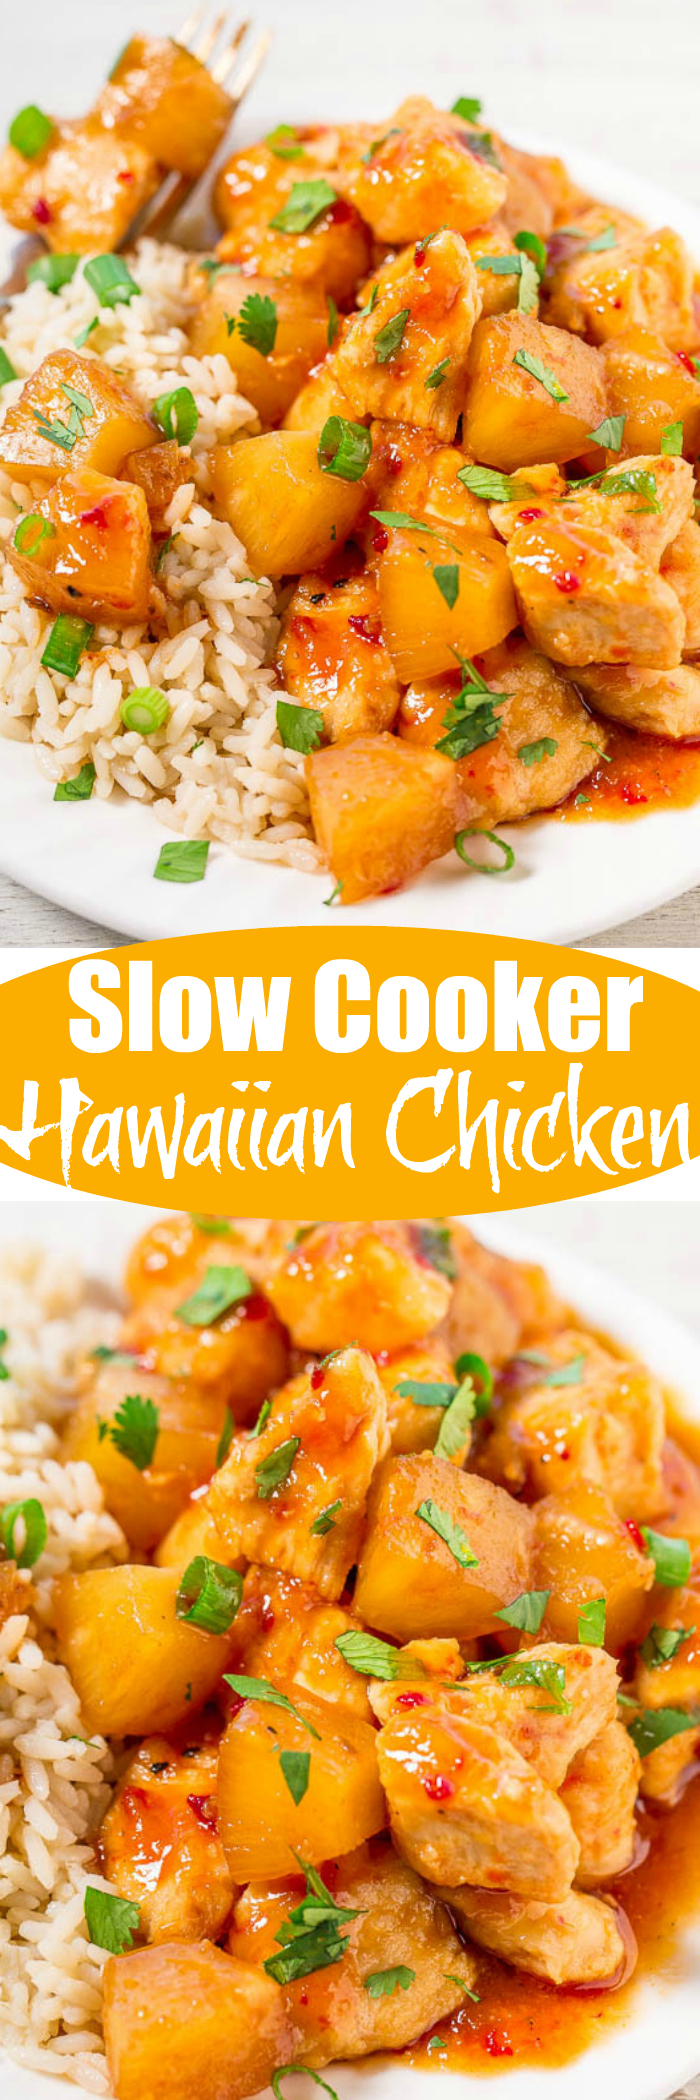 Slow Cooker Hawaiian Chicken with Pineapple - Tender chicken with lots of pineapple makes you feel like you're eating dinner on a Hawaiian vacation without leaving home!! Ridiculously easy, packed with flavor, and a hit with everyone!!